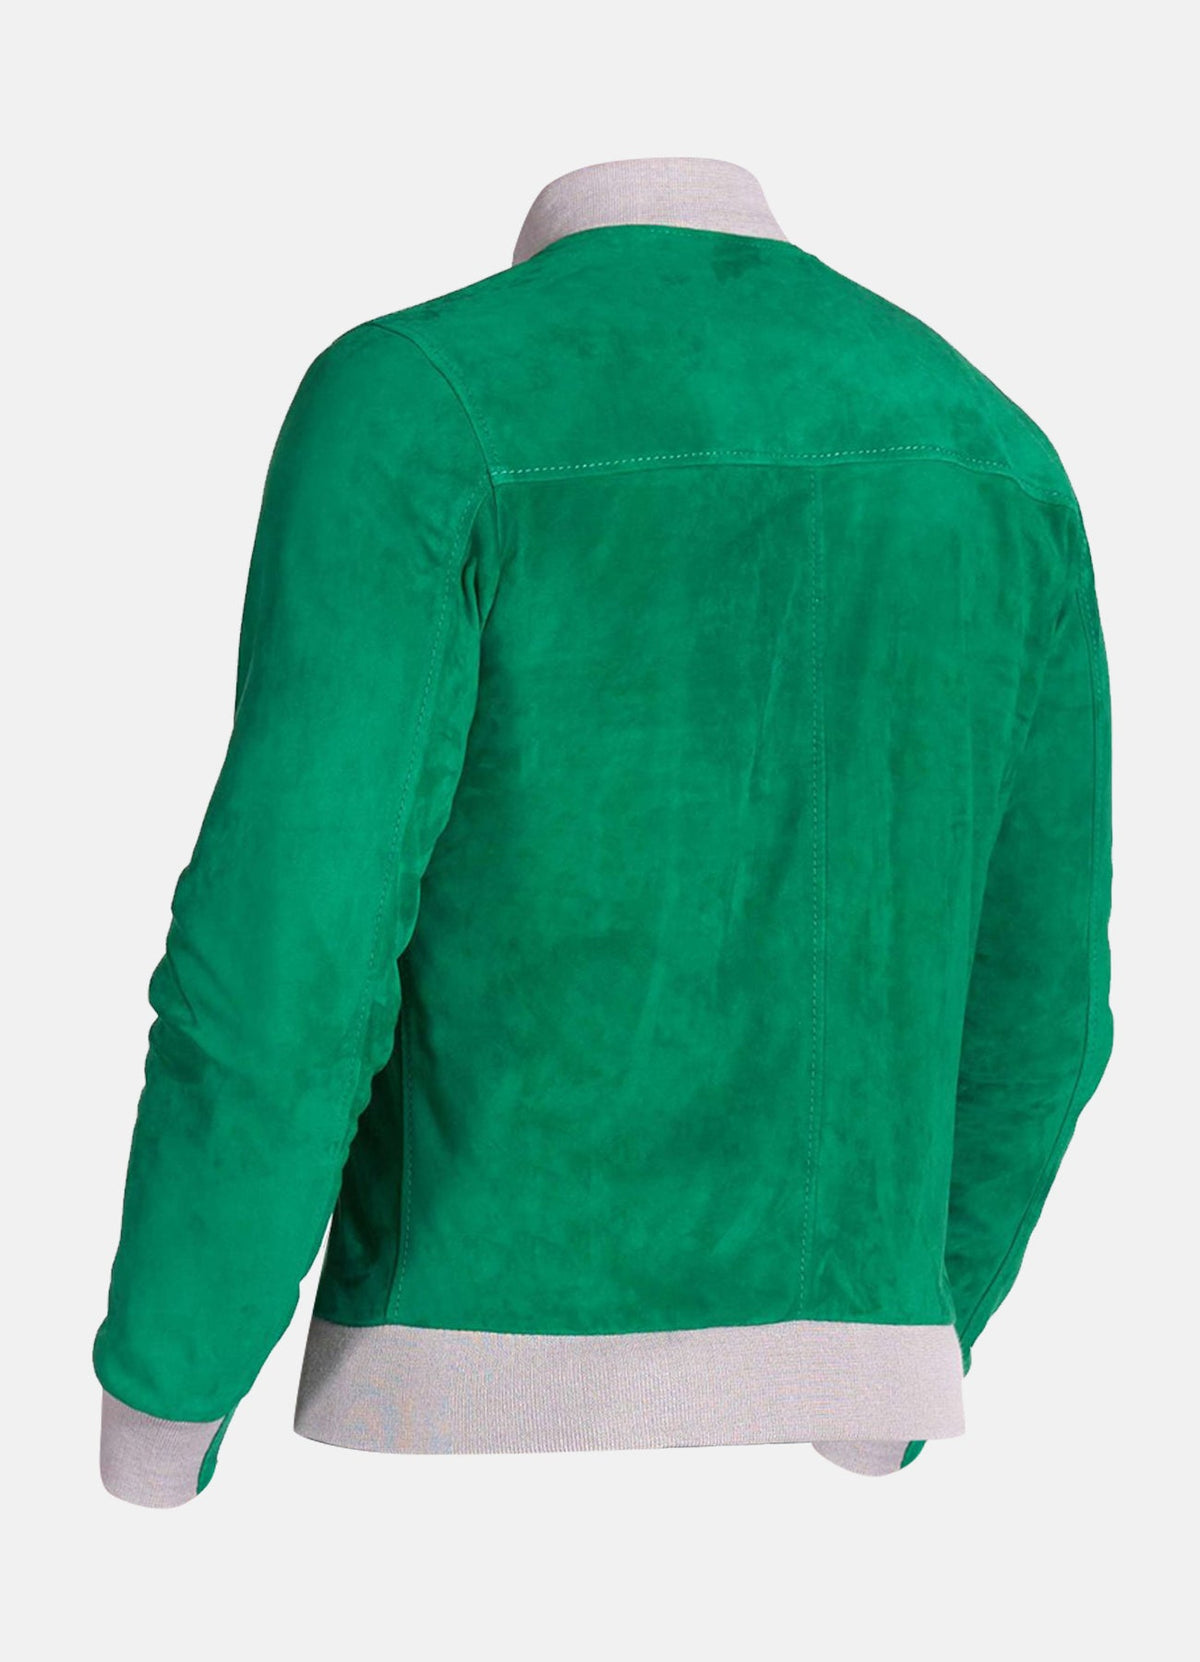 Mens Bright Green Suede Leather Jacket